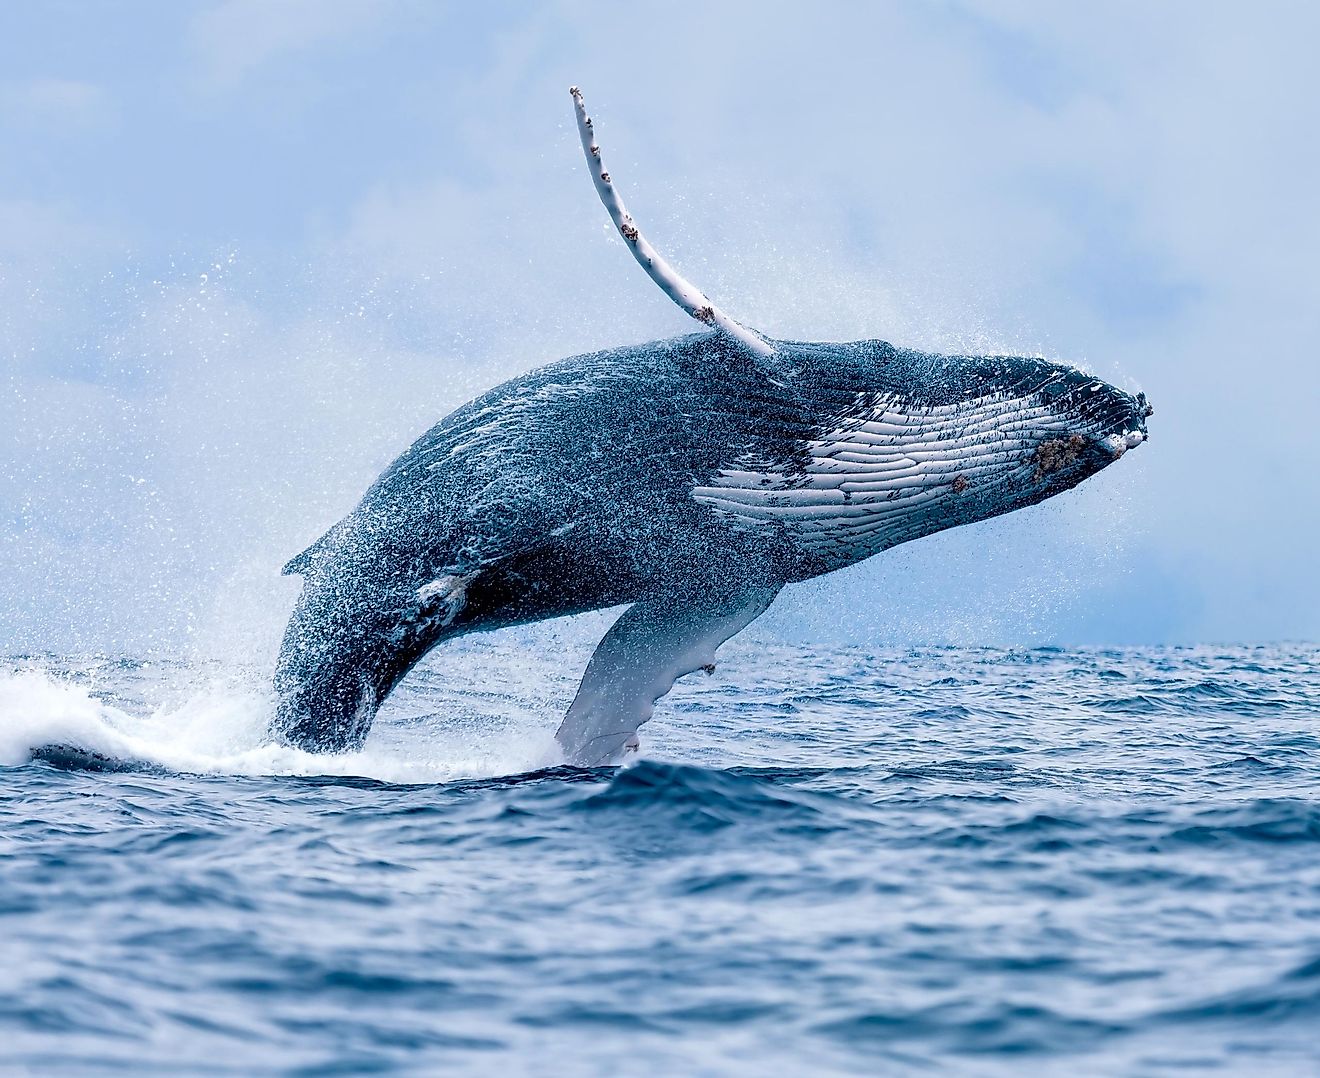 It’s a spectacular, mesmerizing sight, a gigantic mammal flinging itself out of the ocean.